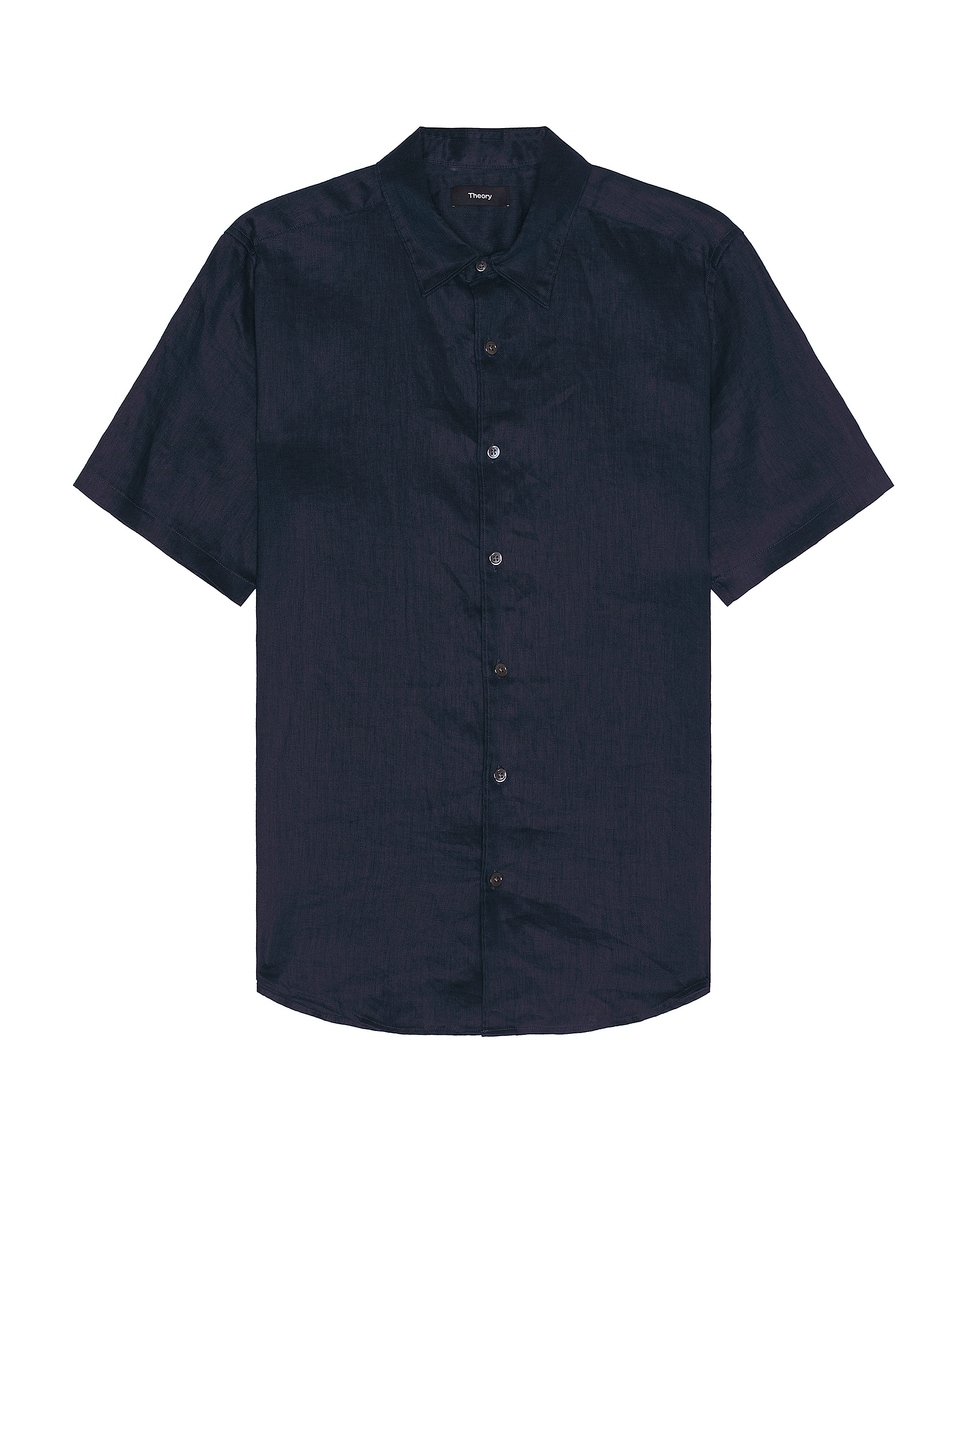 Image 1 of Theory Irving Linen Short Sleeve Shirt in Baltic